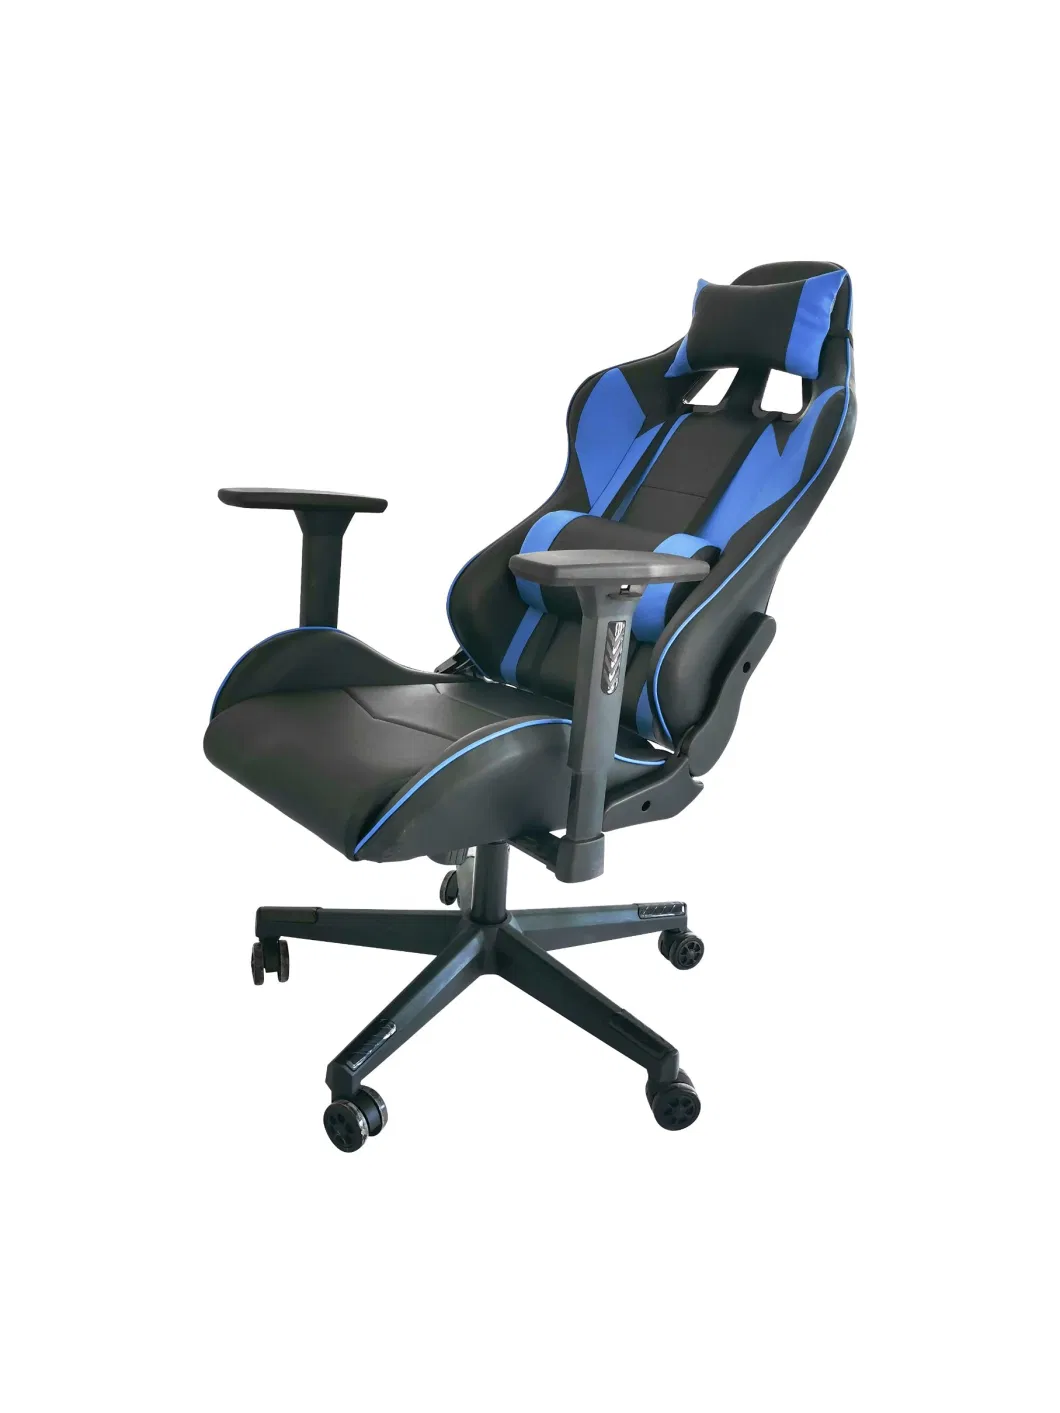 Chinese Home Furniture Modern School Dining Massage Executive Game Gaming Office Chairs